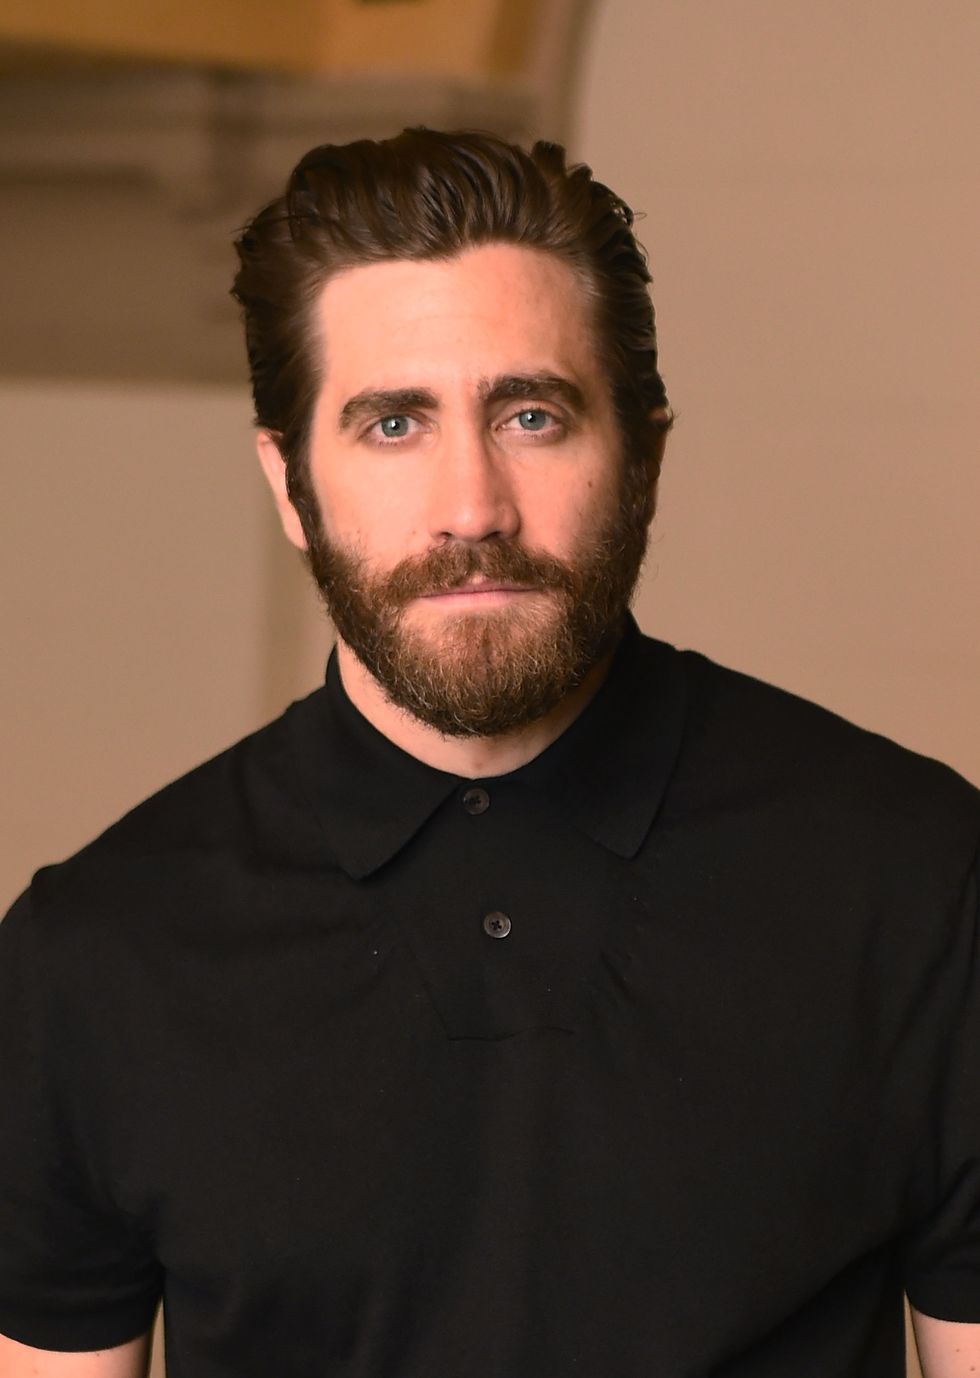 new york, ny   july 01  actor jake gyllenhaal attends the opening night of the new york city center encores off center production of little shop of horrors at manhattan theatre club at new york city center on july 1, 2015 in new york city  photo by andrew h walkergetty images